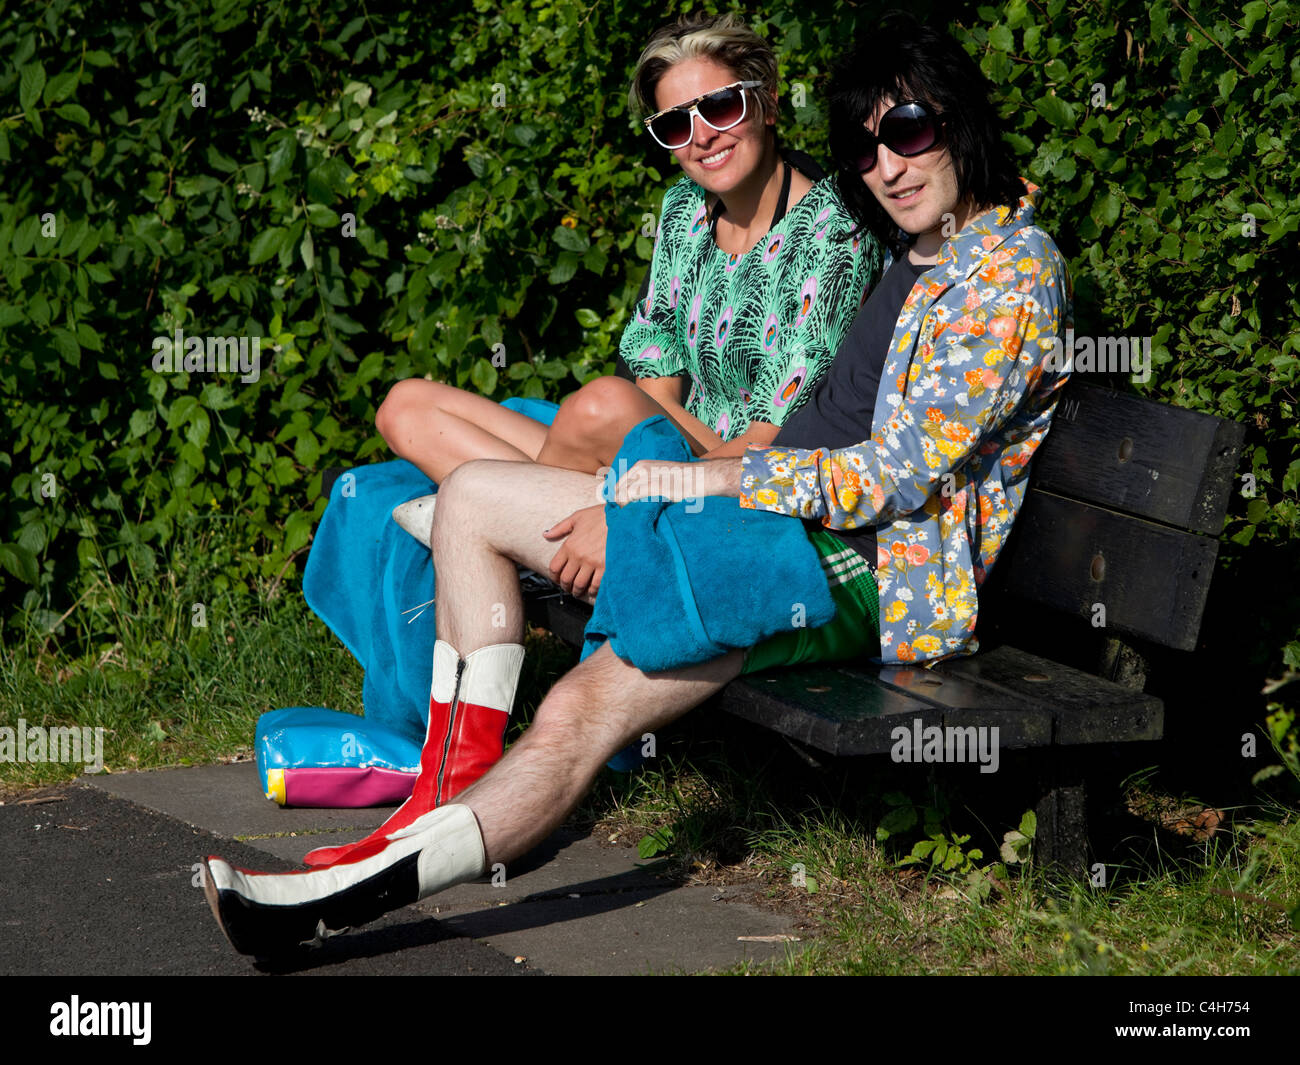 Noel Fielding sitting on a bench with a beautiful woman, Parliament Hill, Hampstead Heath, London, England, UK. Stock Photo